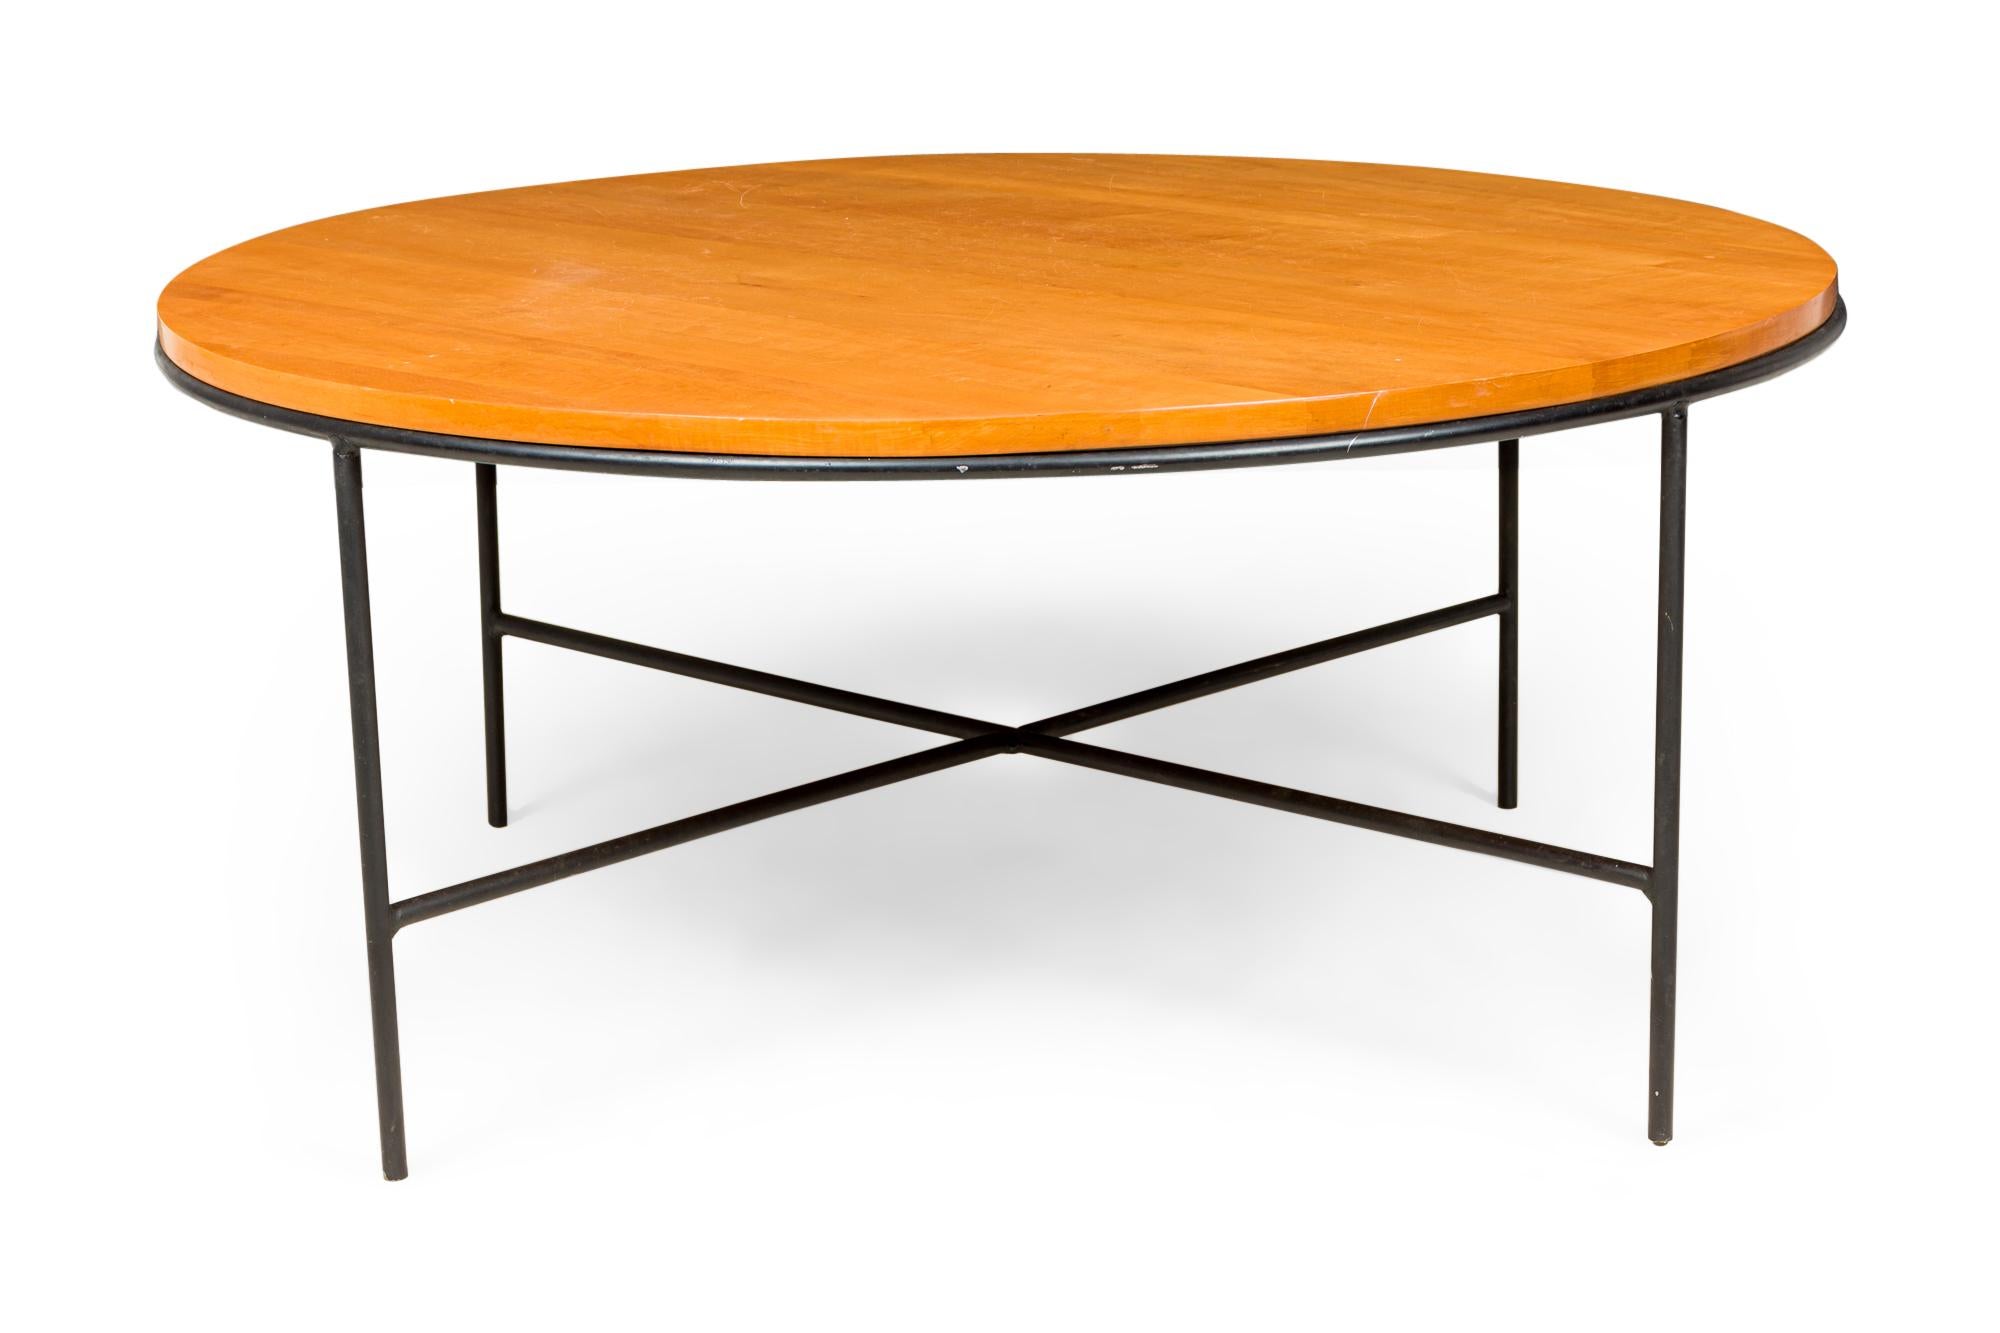 20th Century Paul McCobb for Winchendon Planner Group Circular Maple and Iron Coffee Tables For Sale